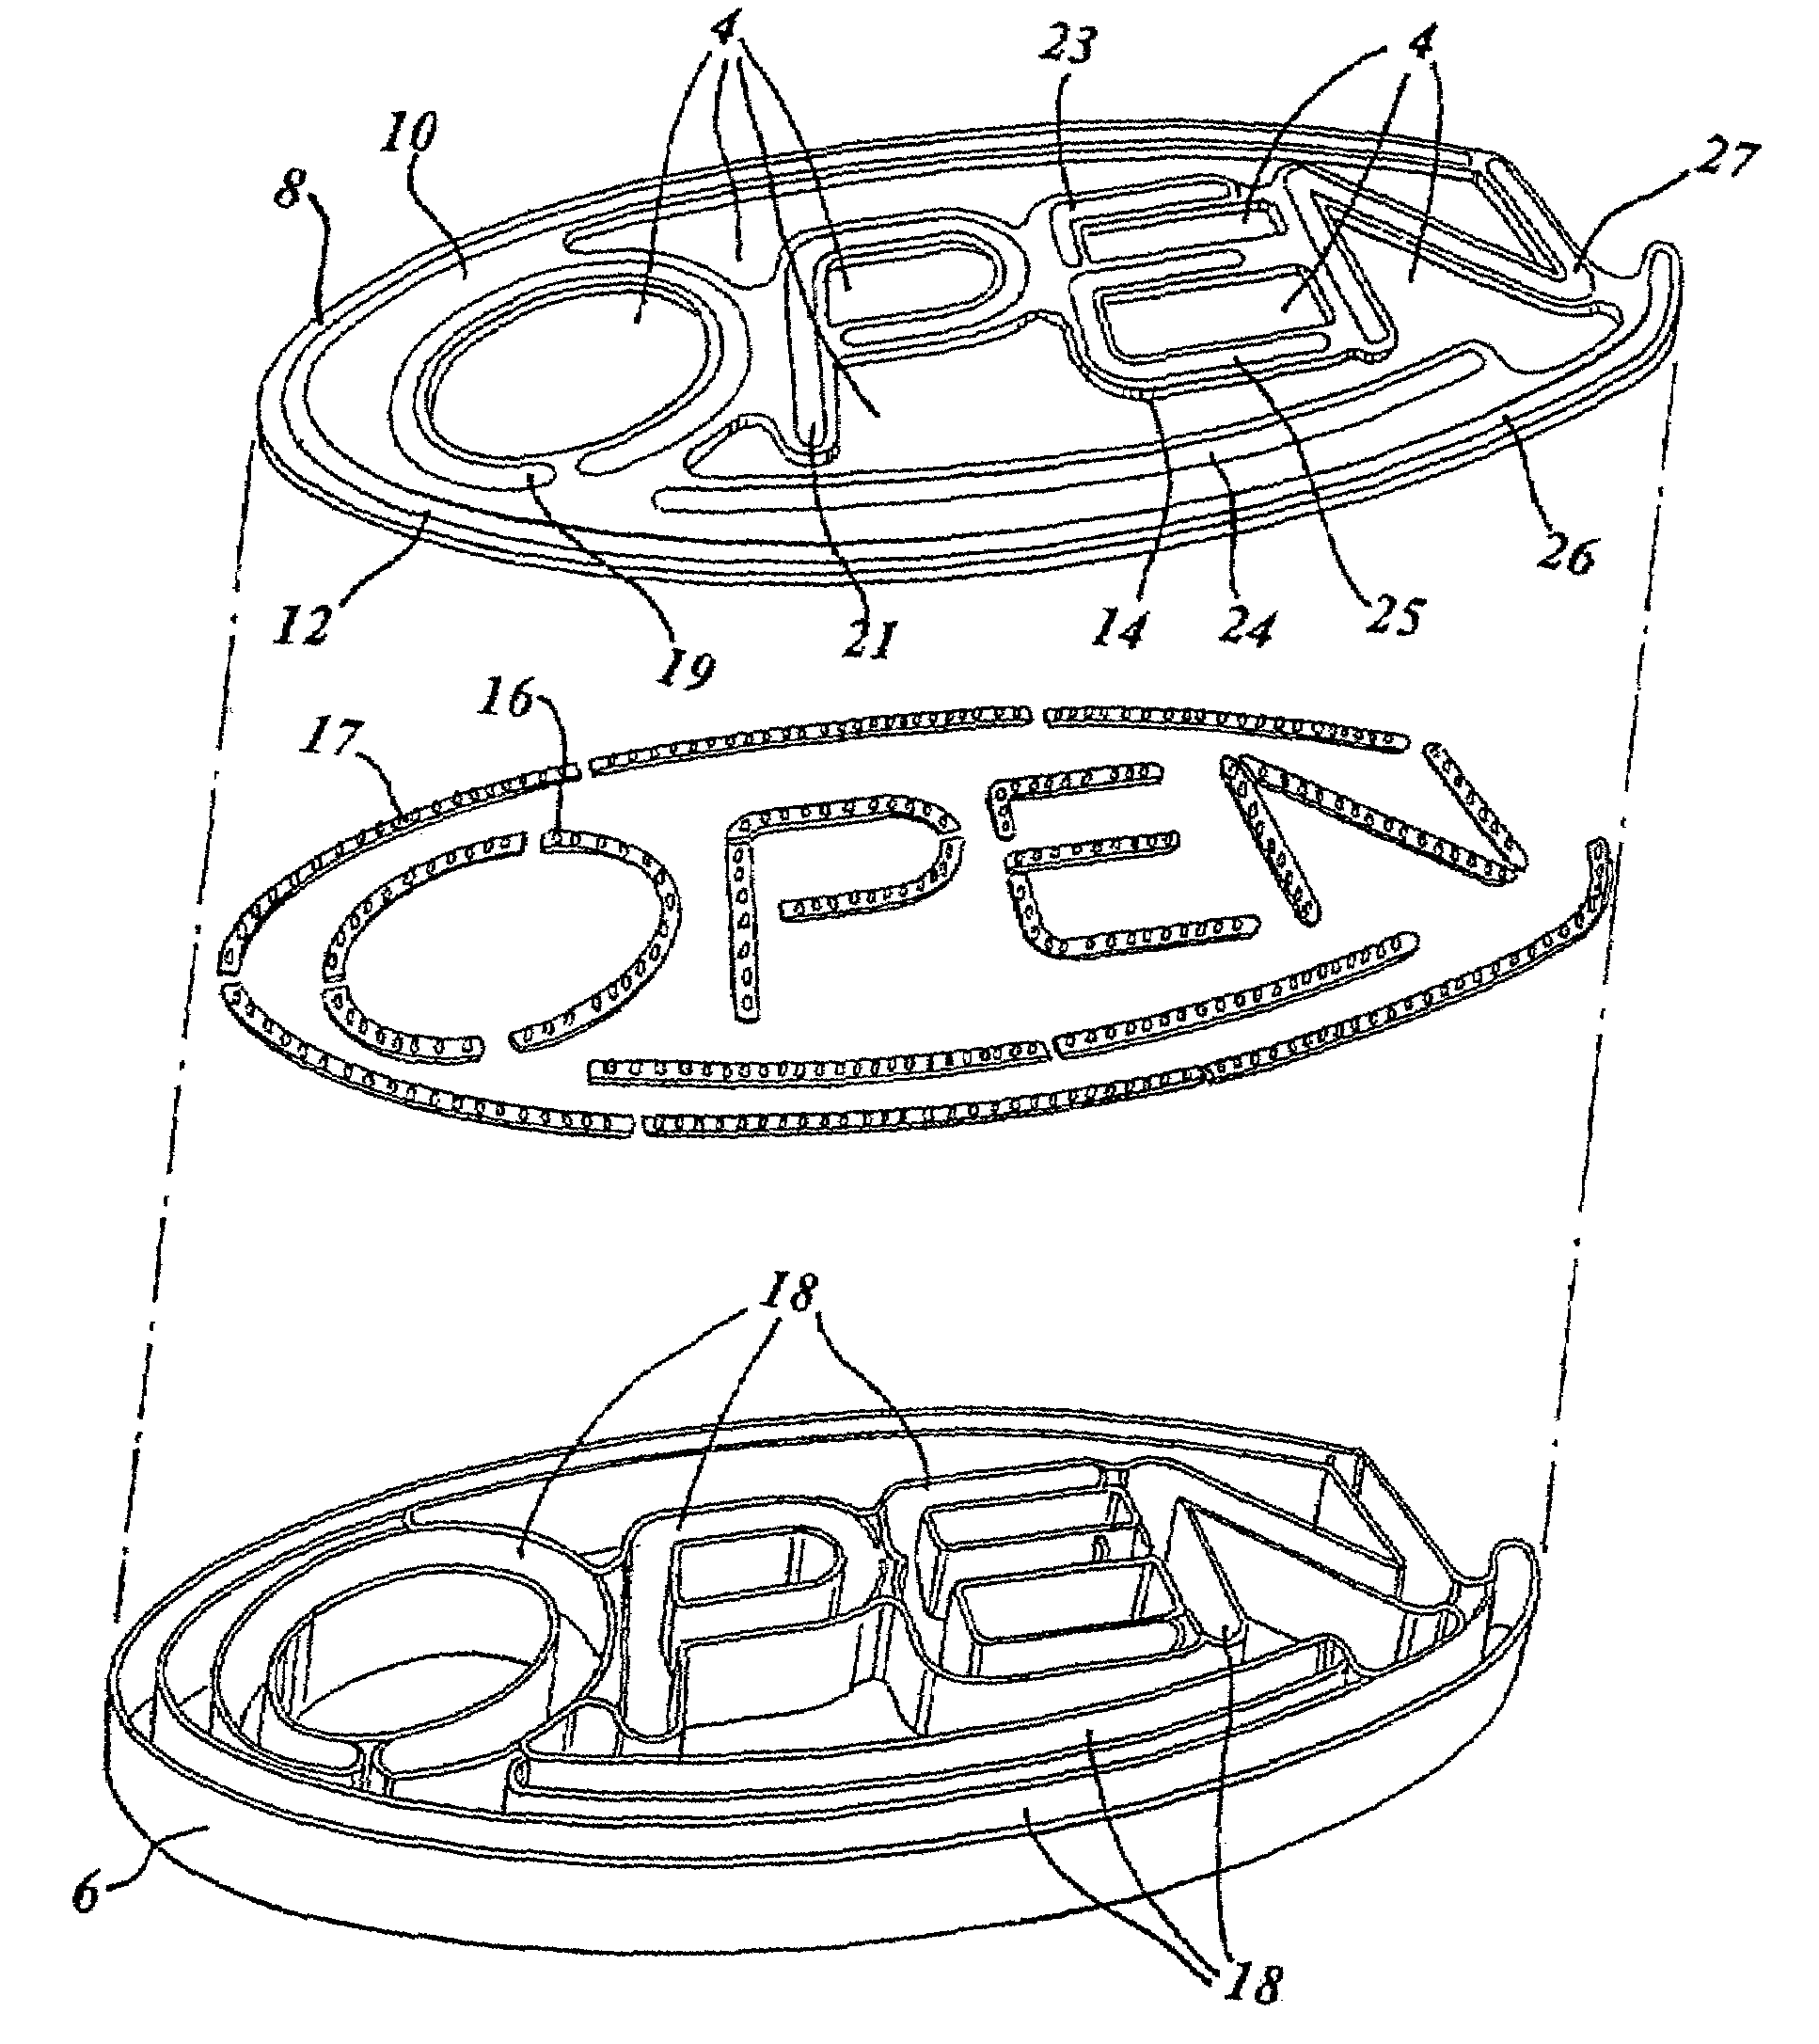 Method and apparatus for simulating the appearance of a neon sign